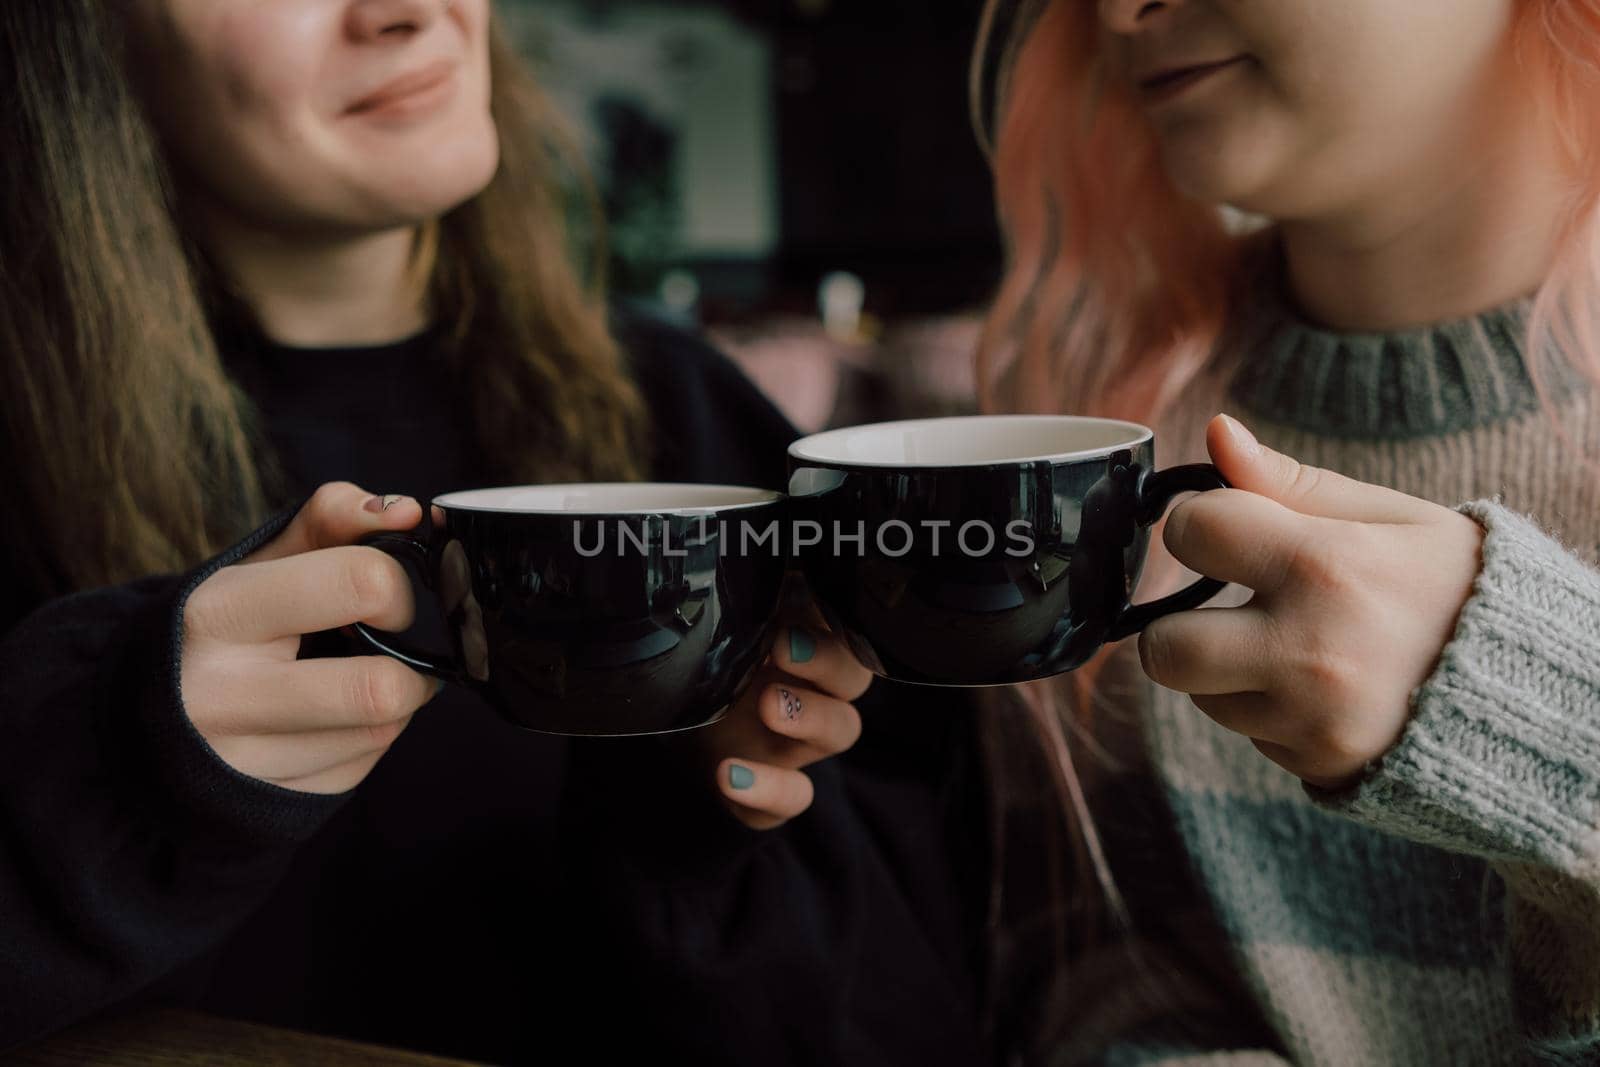 Interracial lesbian couple each other with shy smile, holding hands during lunch at restaurant. Happy redhead woman confessing love to her stylish Asian American girlfriend with pink hair hairstyle. closeup. selective focus on cups